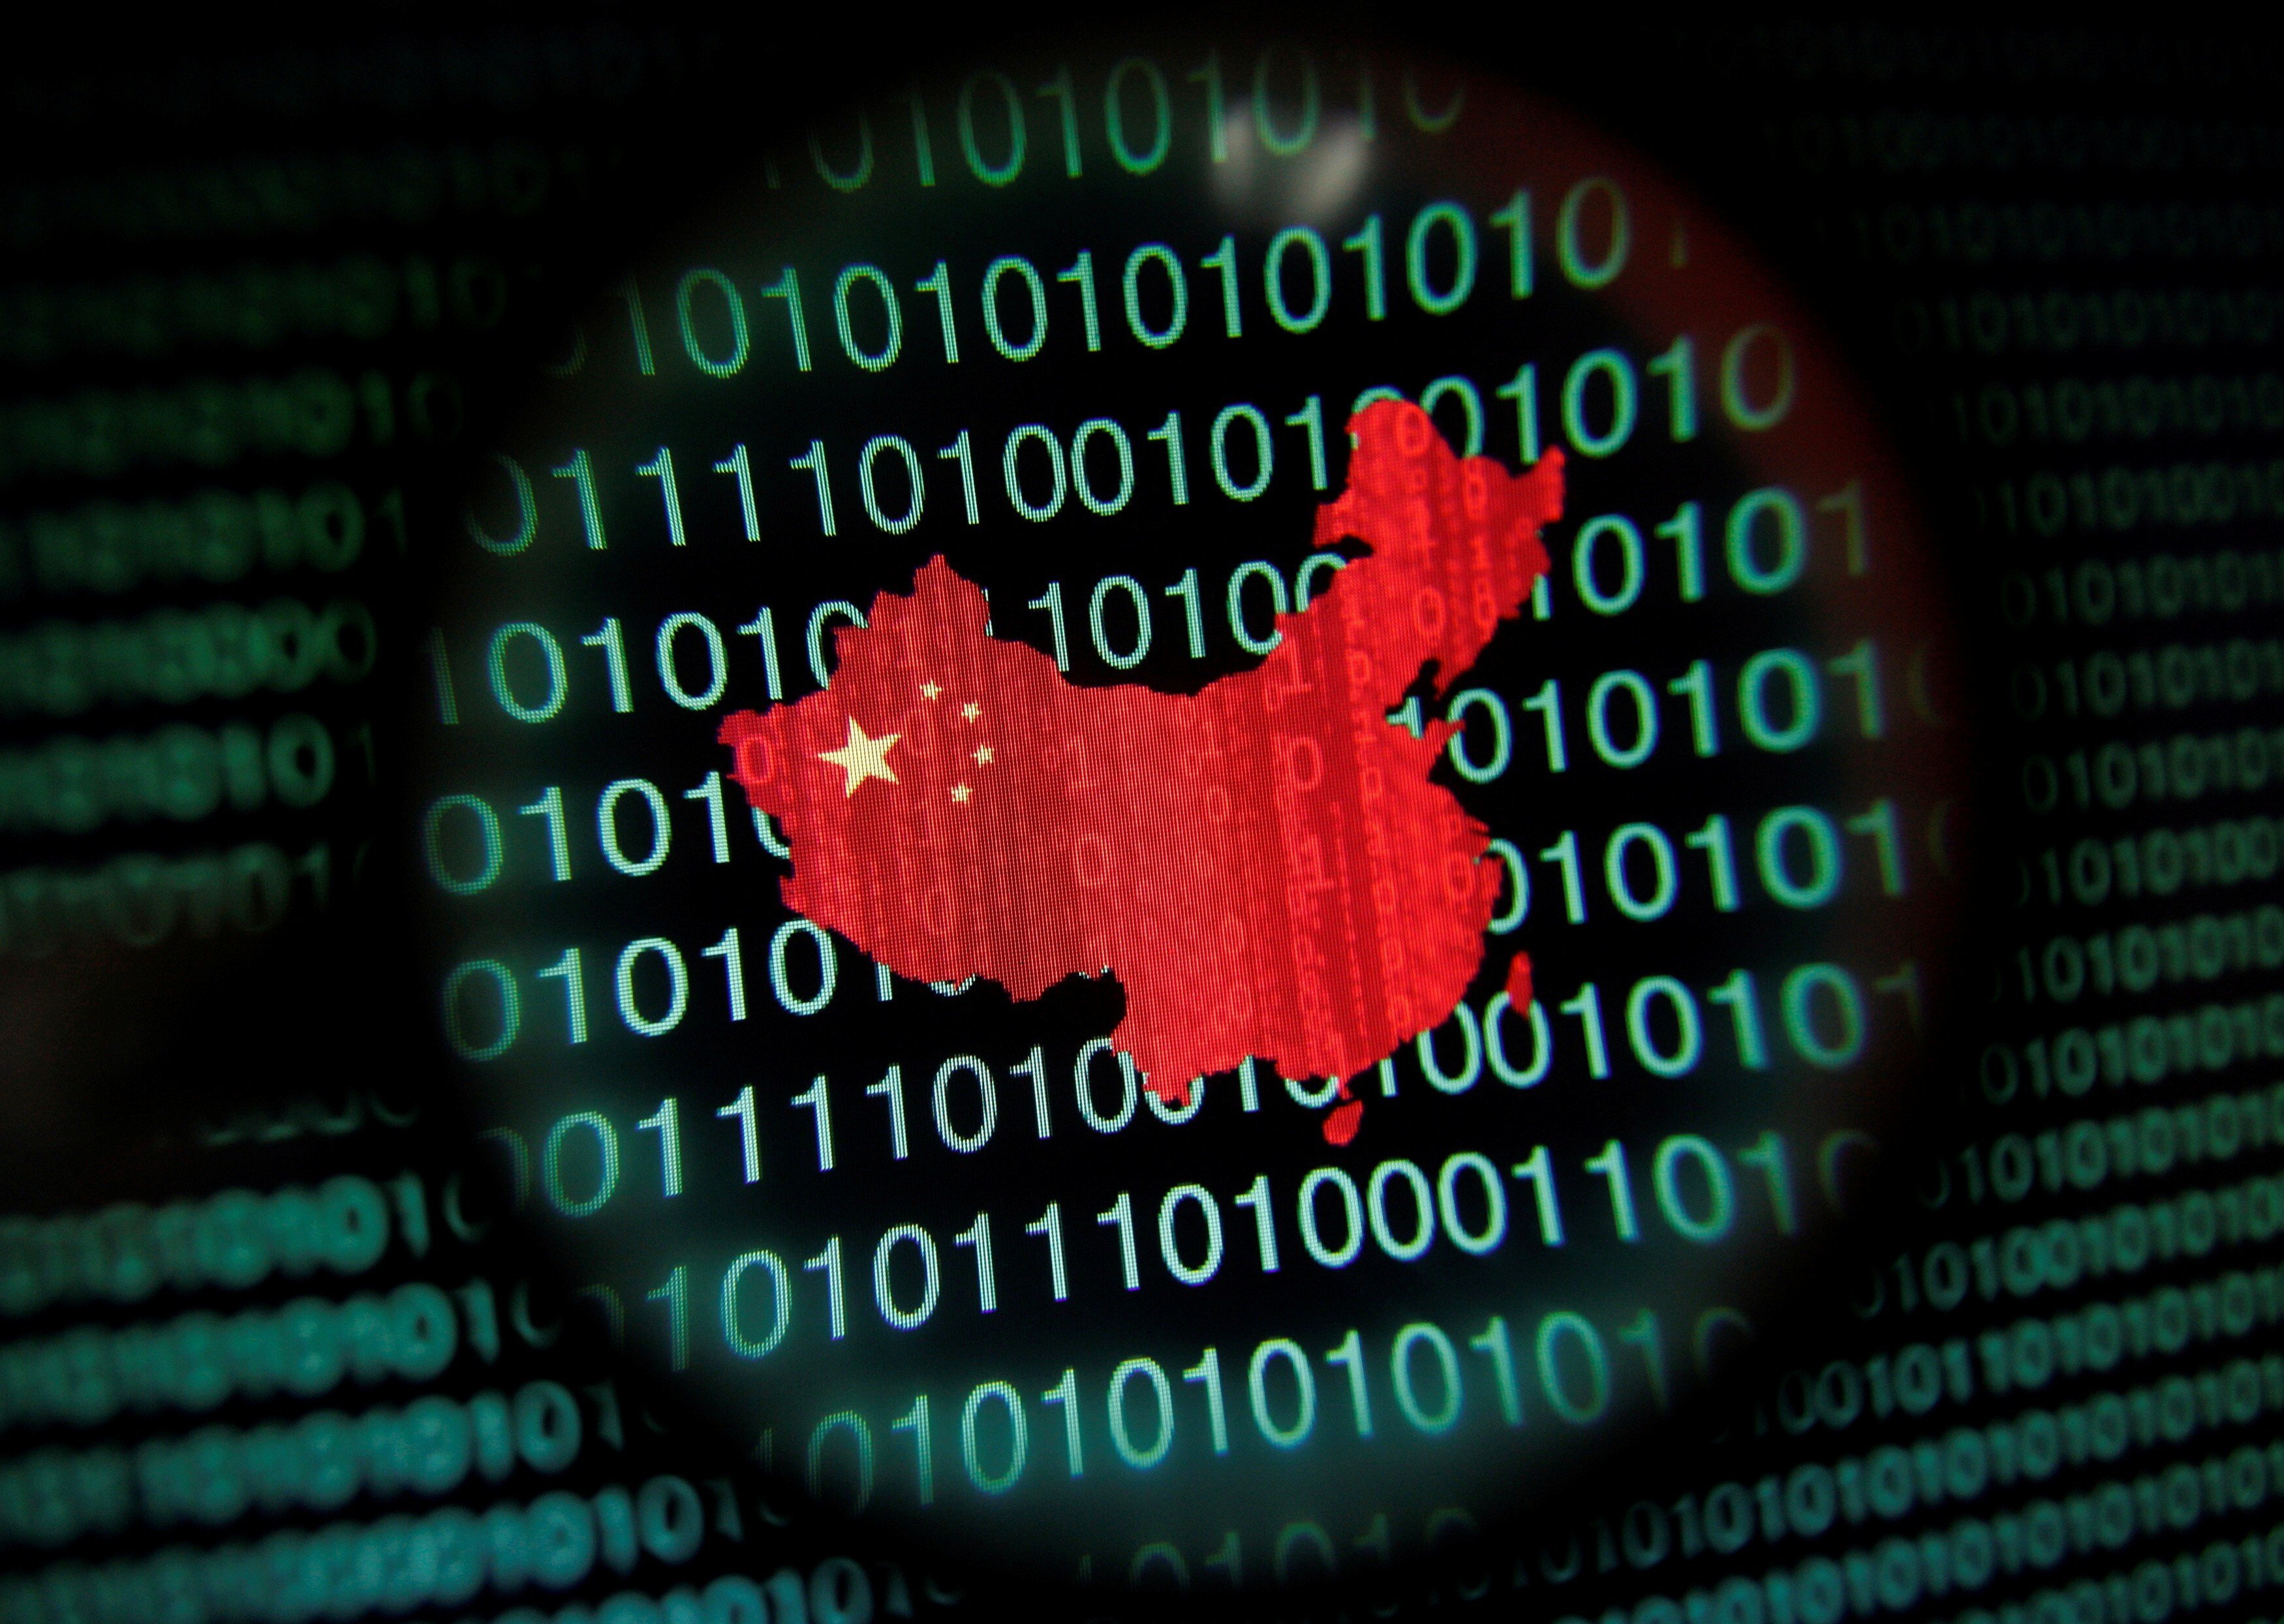 A broad group of countries have accused China of state-backed hacking. Photo: Reuters